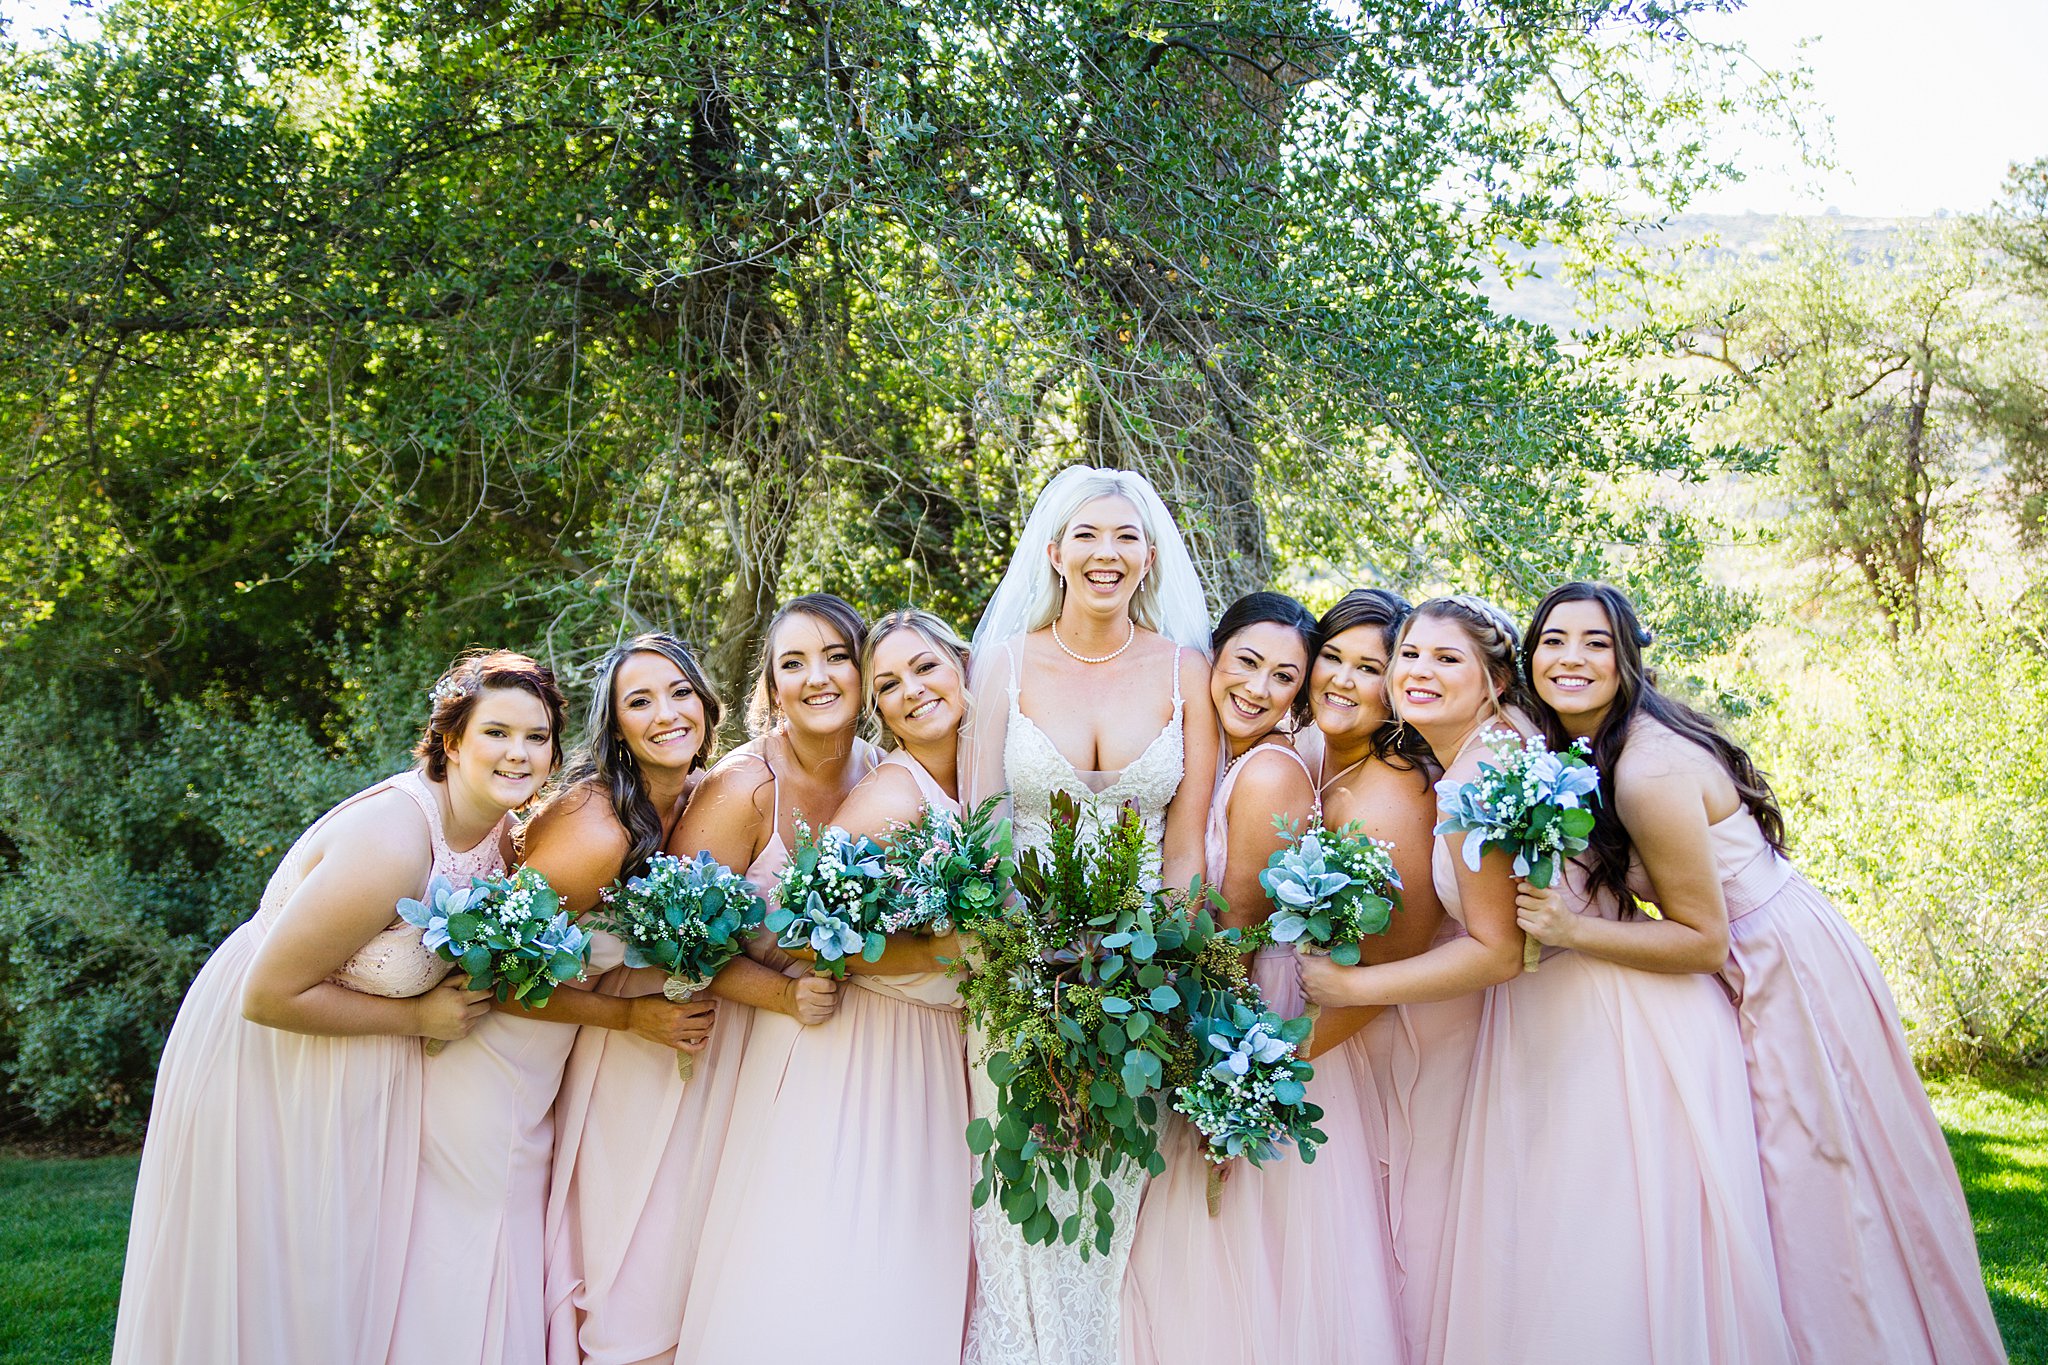 Bride and bridesmaids laughing together at Van Dickson Ranch wedding by Skull Valley wedding photographer PMA Photography.